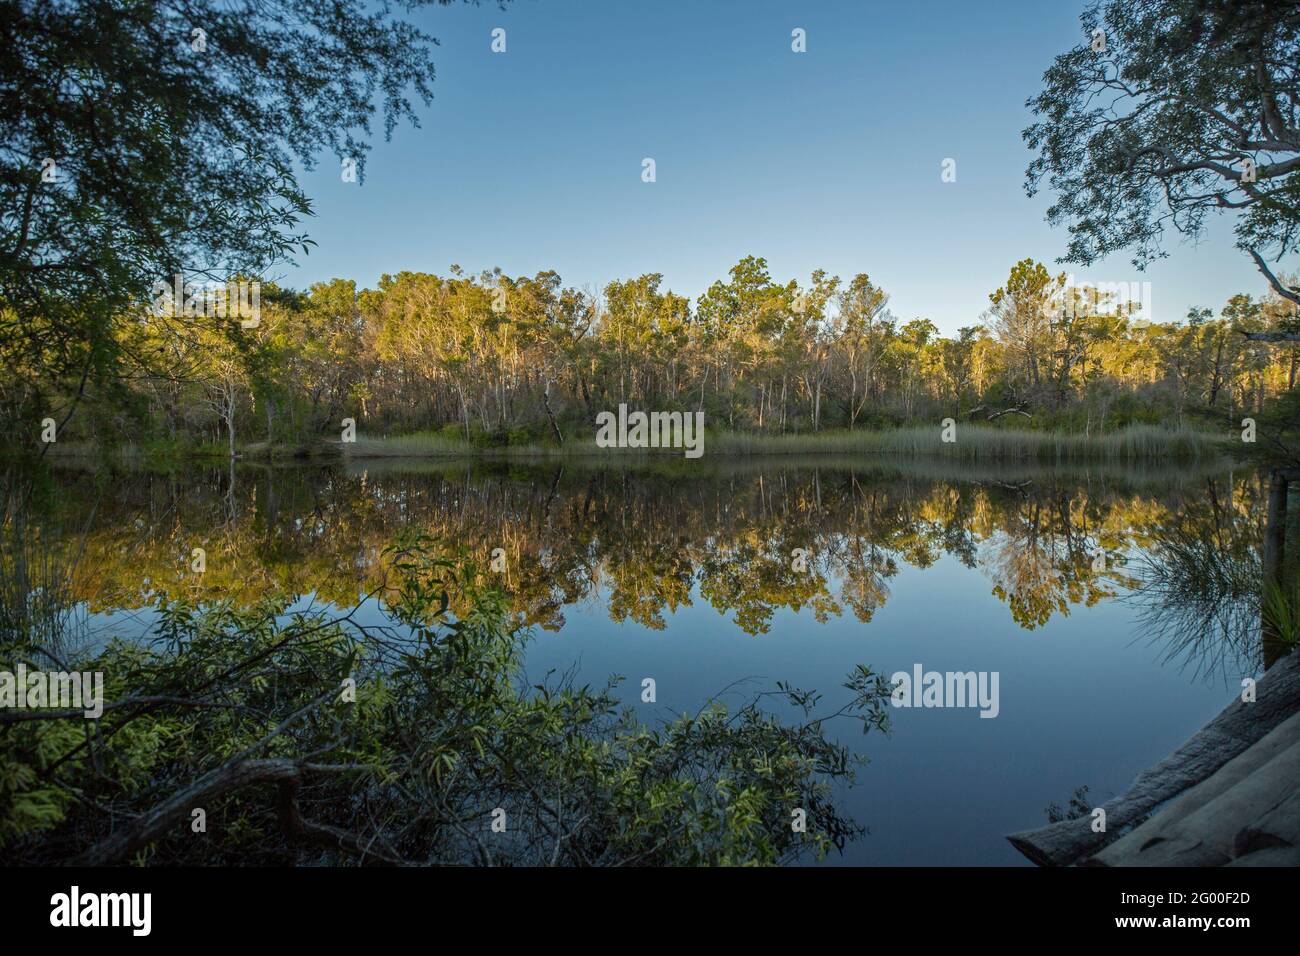 Native vegetation and blue sky reflected in mirror surface of calm dark water of Noosa River, Sunshine Coast, Queensland Australia Stock Photo